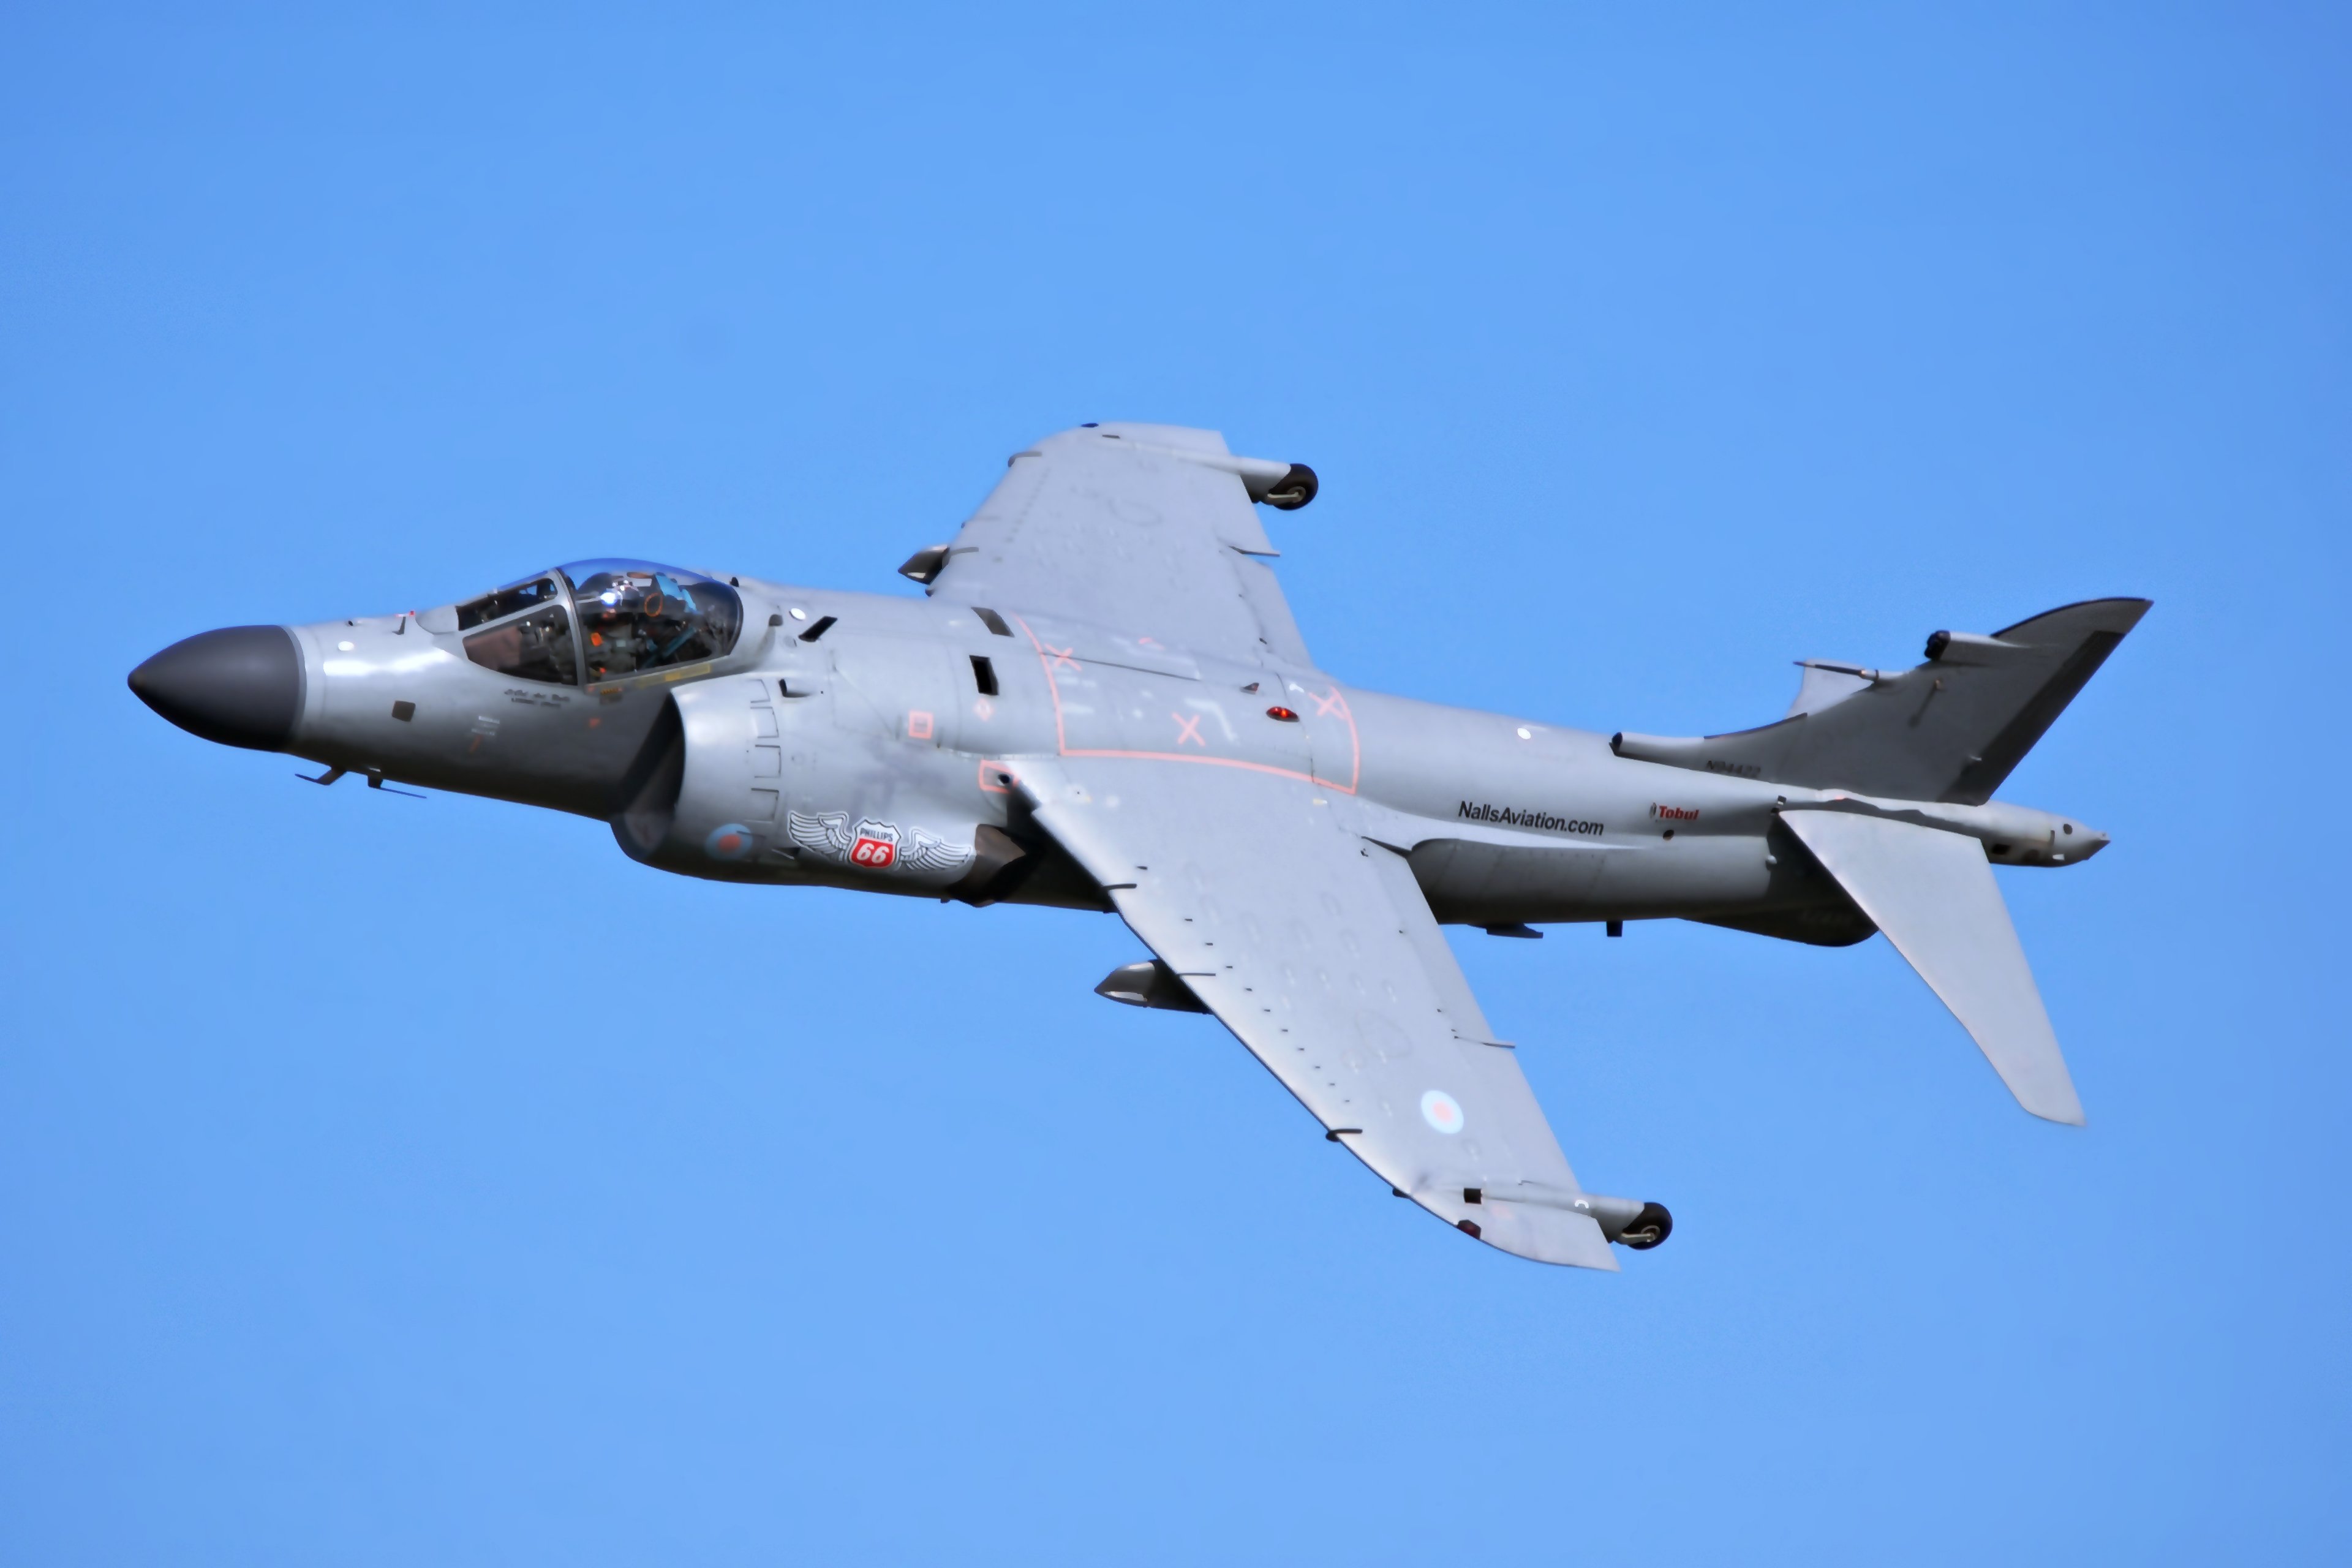 harrier, A2, British, Uk, Aircrafts, Army, Military, Sky, Fighters Wallpaper